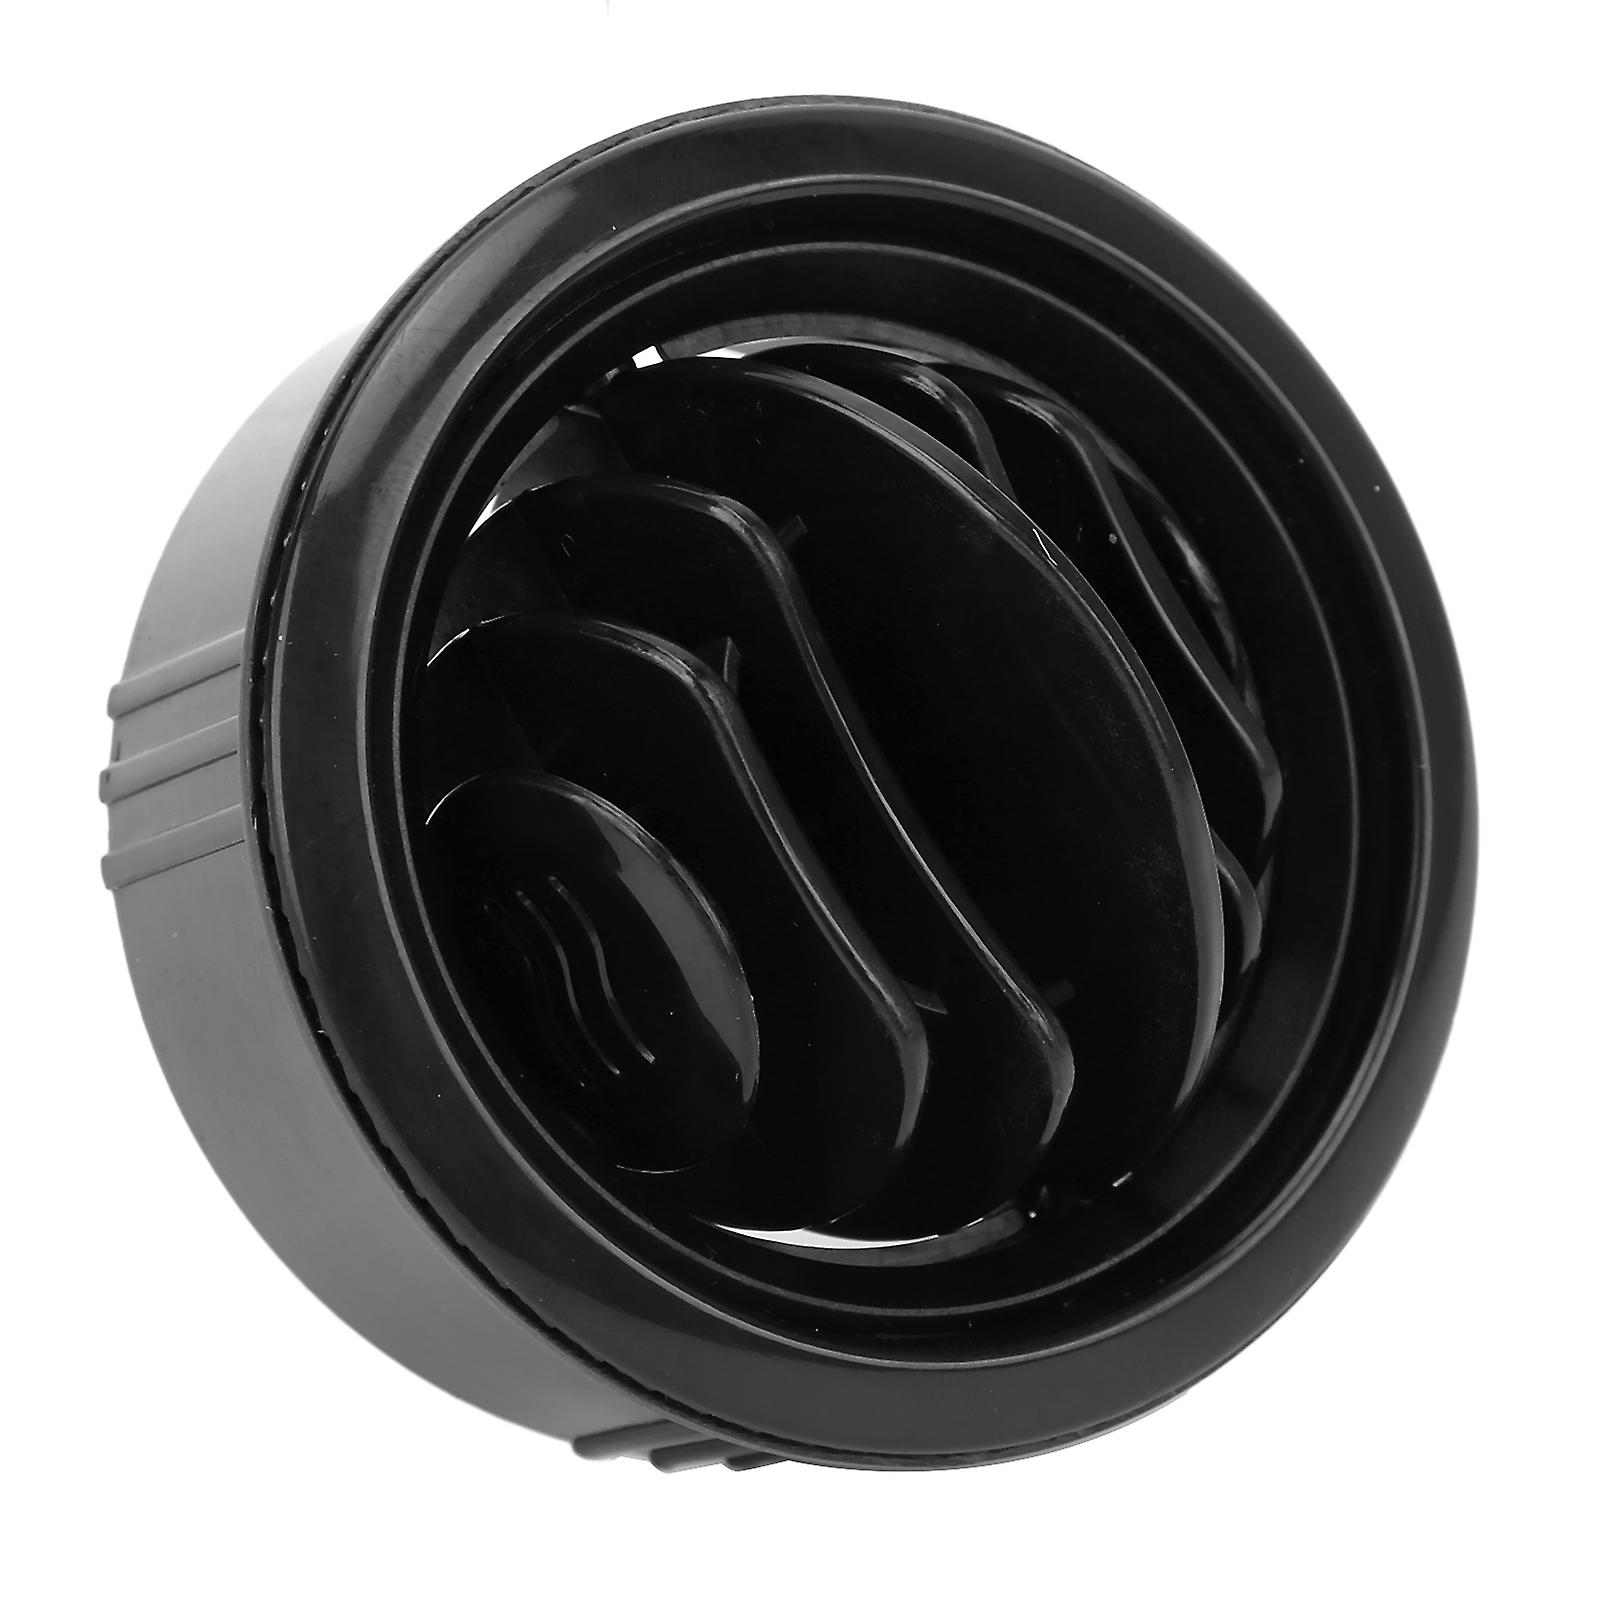 Car Air Conditioner Outlet Vent Cover Round 63mm/2.5in Maintenance For Rvs Buses Boats